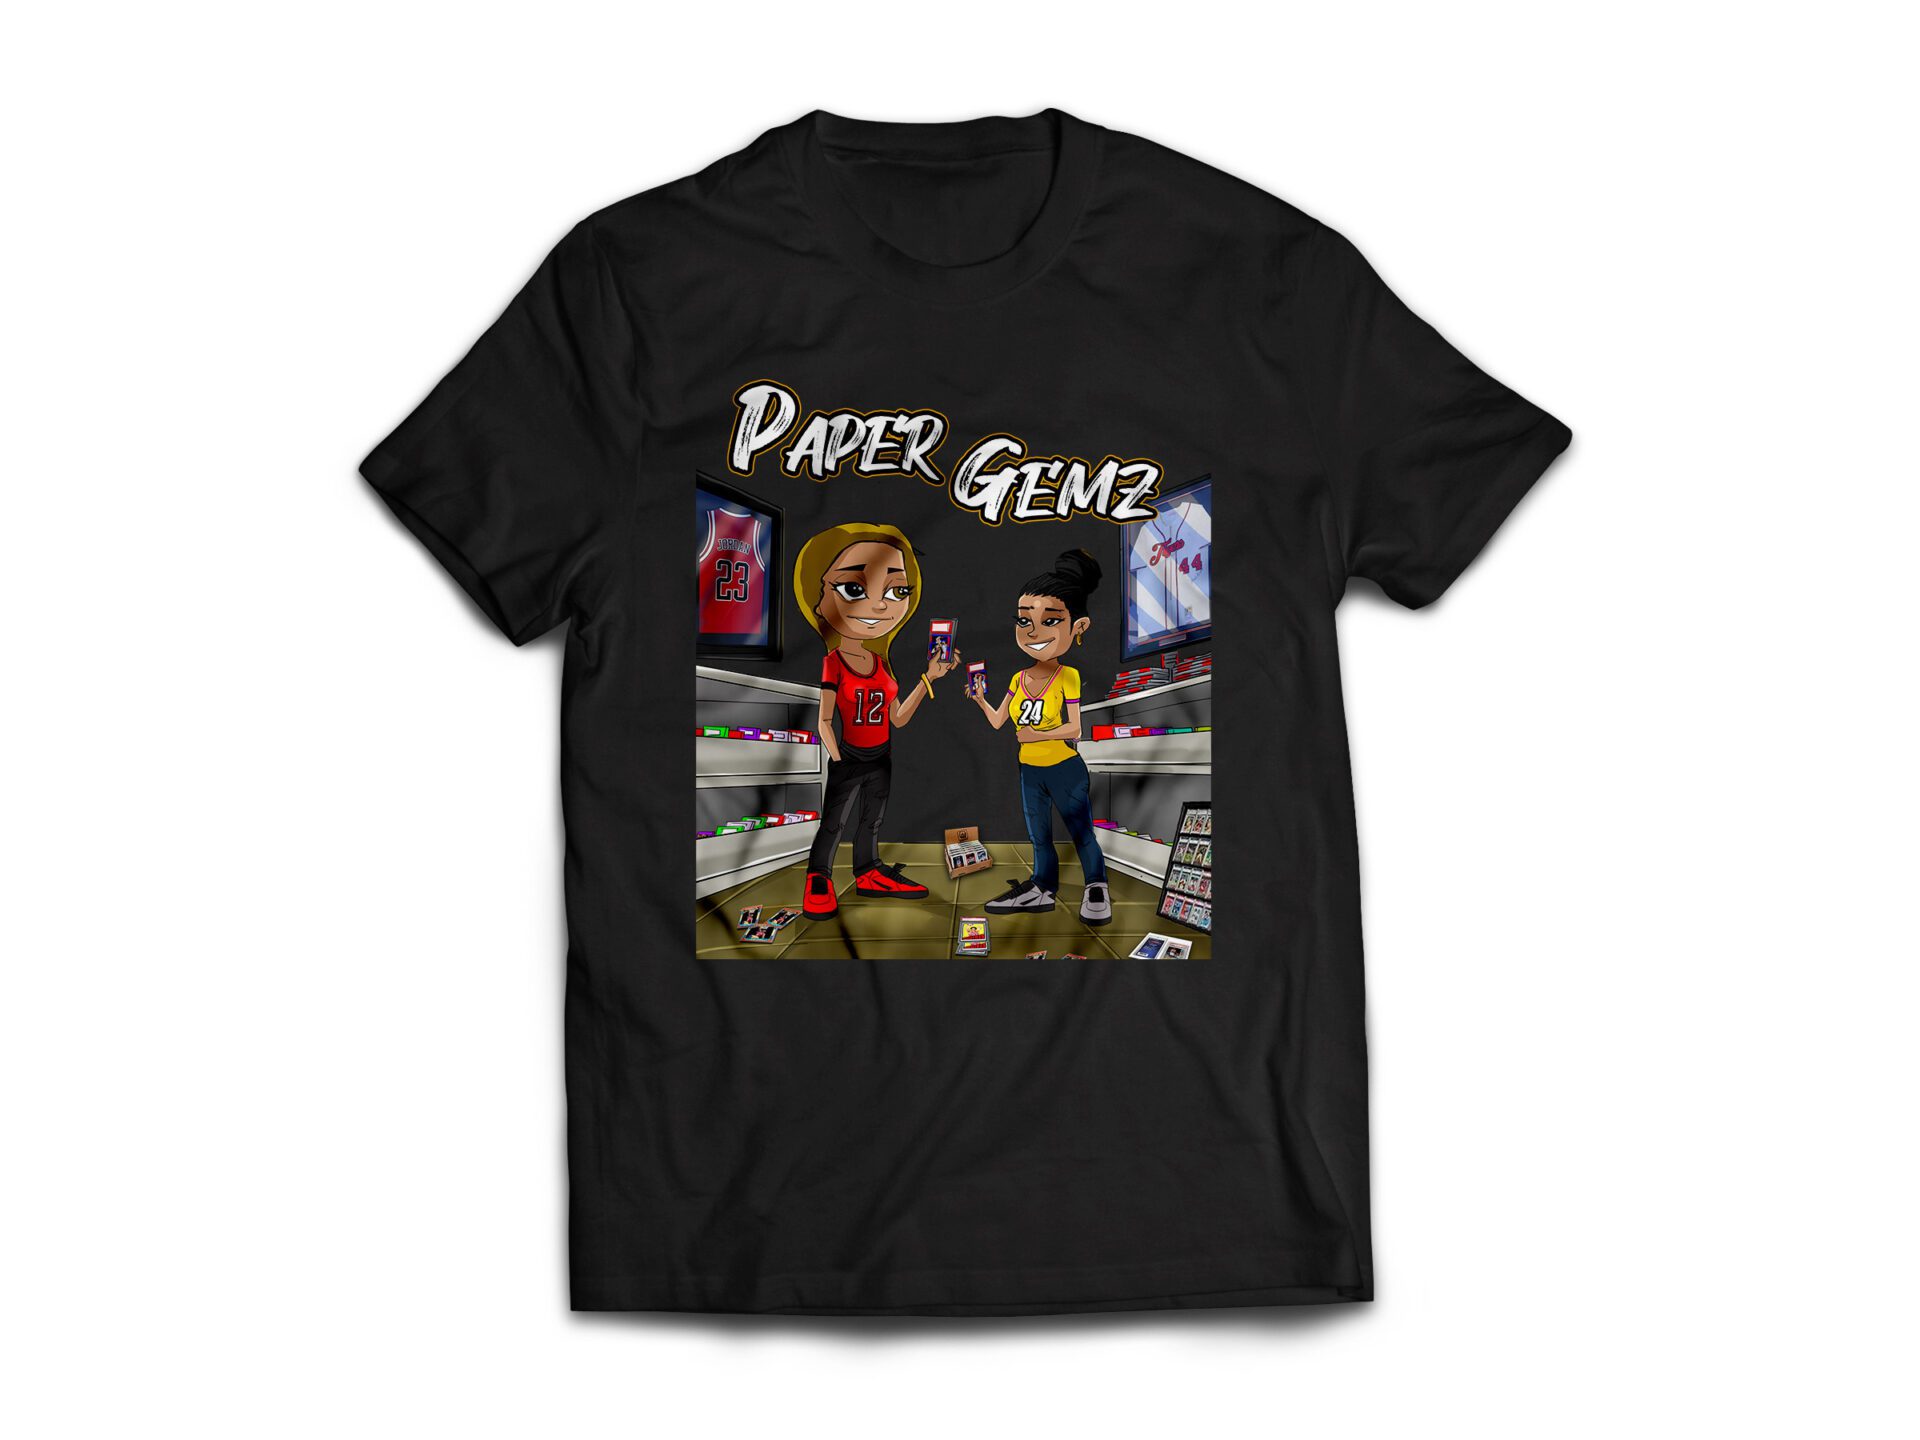 A shirt featuring two women in a collectibles store